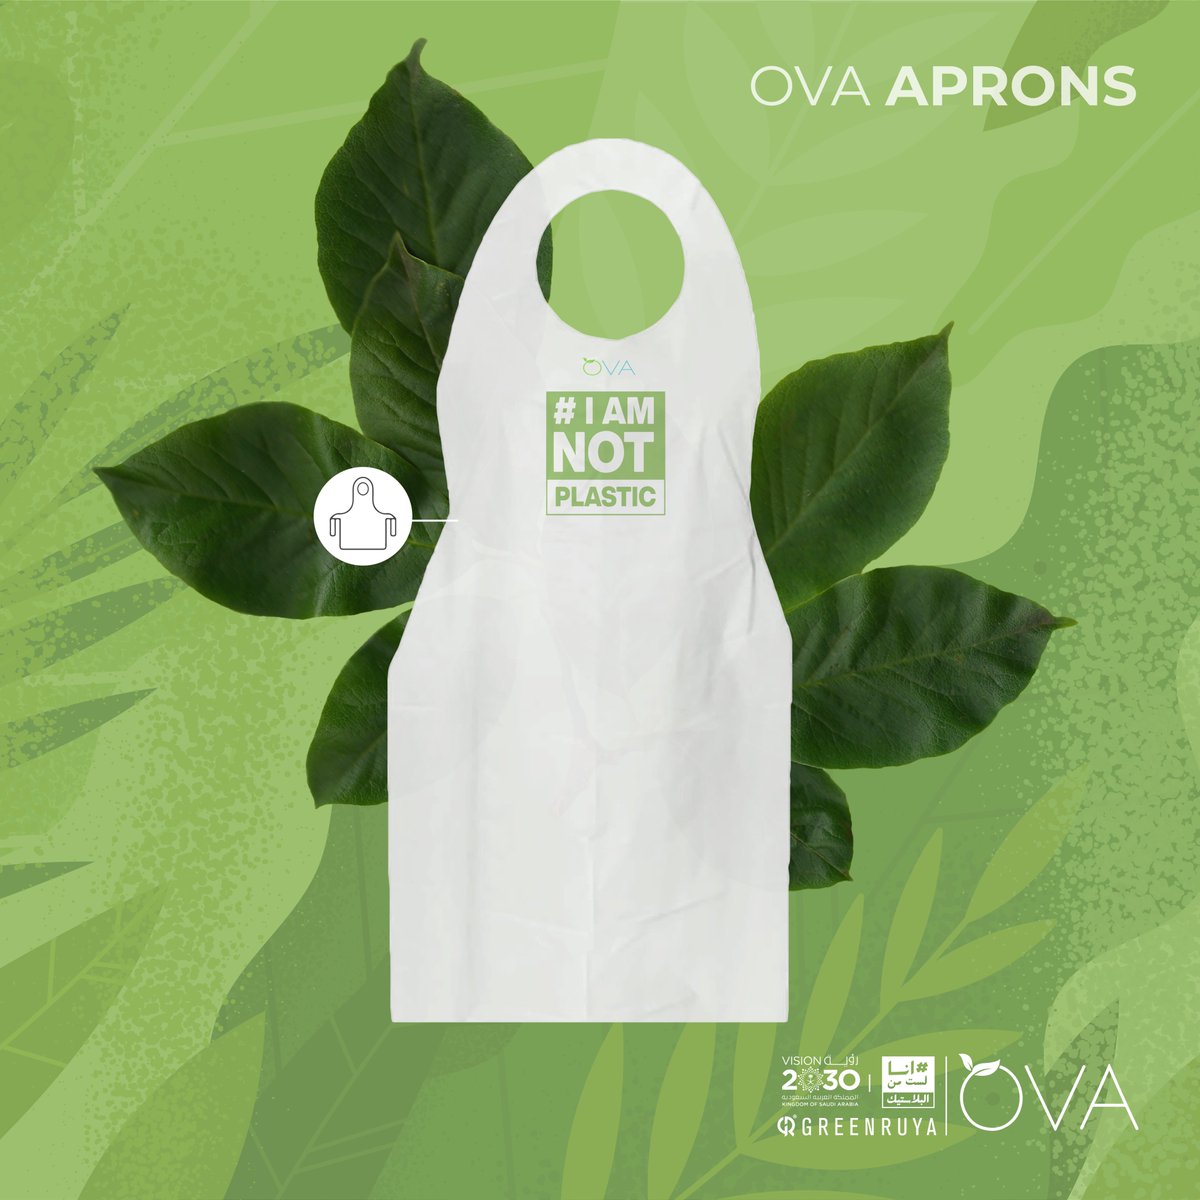 Introducing our newest addition to the Cassava Bags family: our apron made from cassava starch! This innovative material is not only sustainable but also durable. #cassavabags #apronlove #kitchenessentials #environmentallyfriendly #iamnotplastic #madeinsaudiarabia